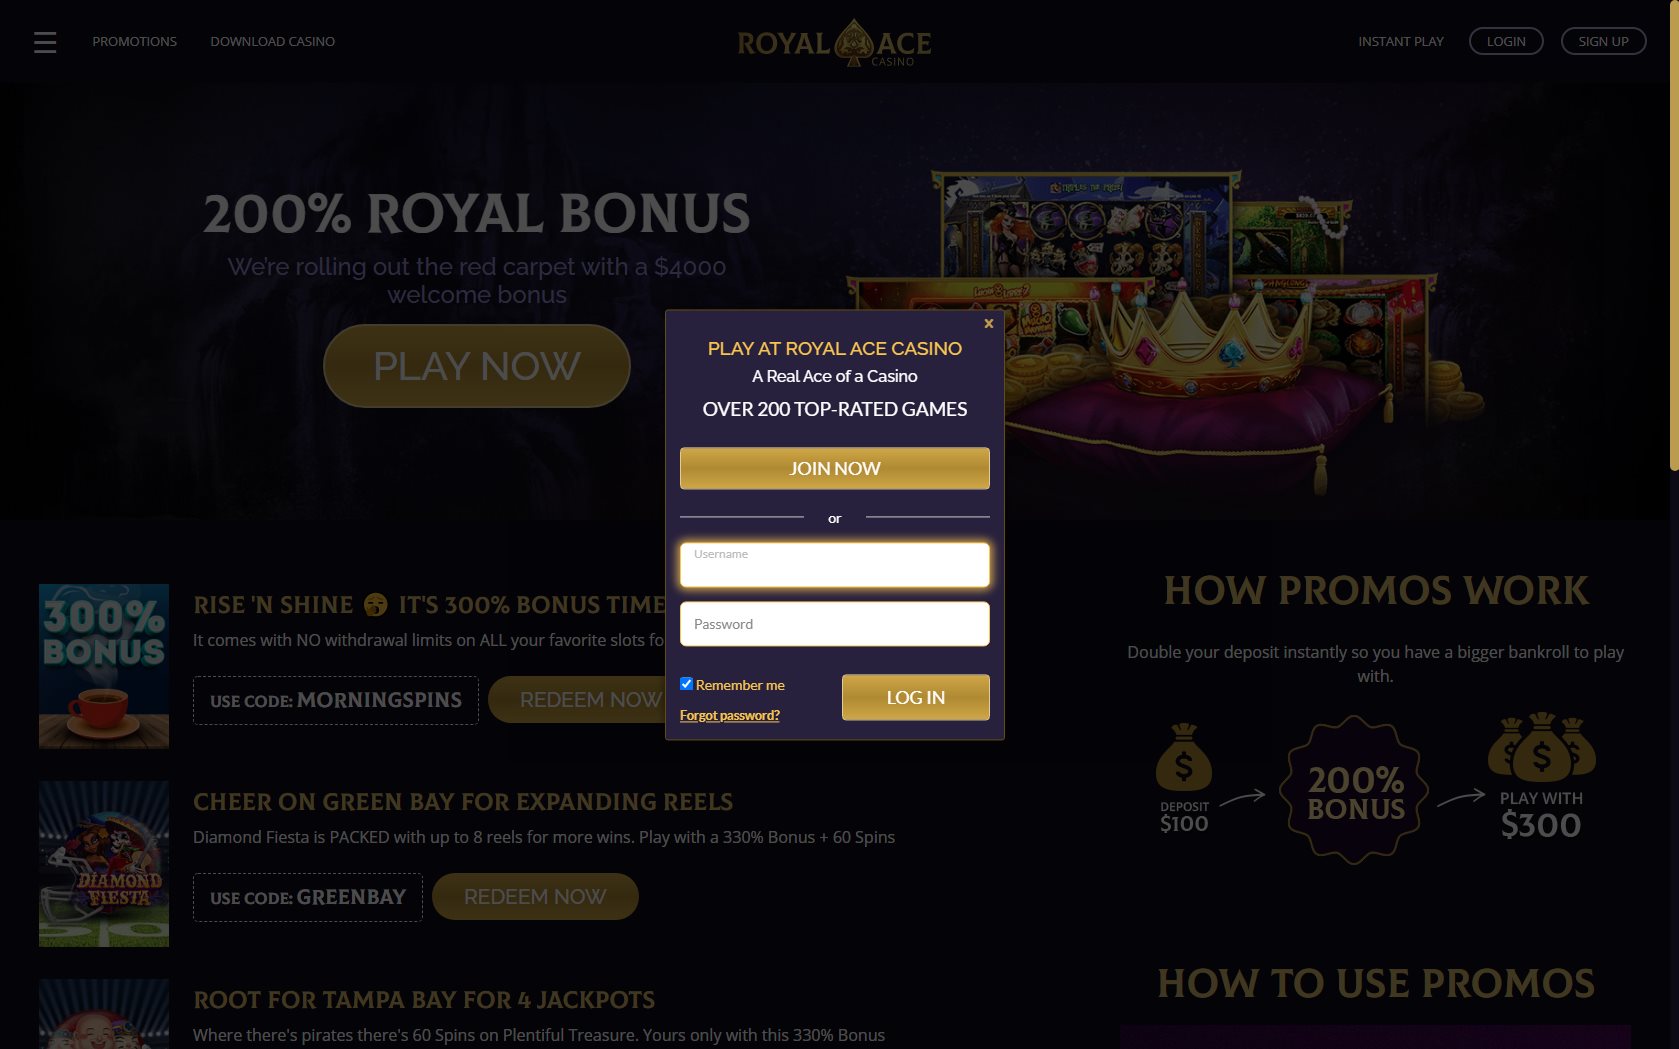 royal ace casino spam emails